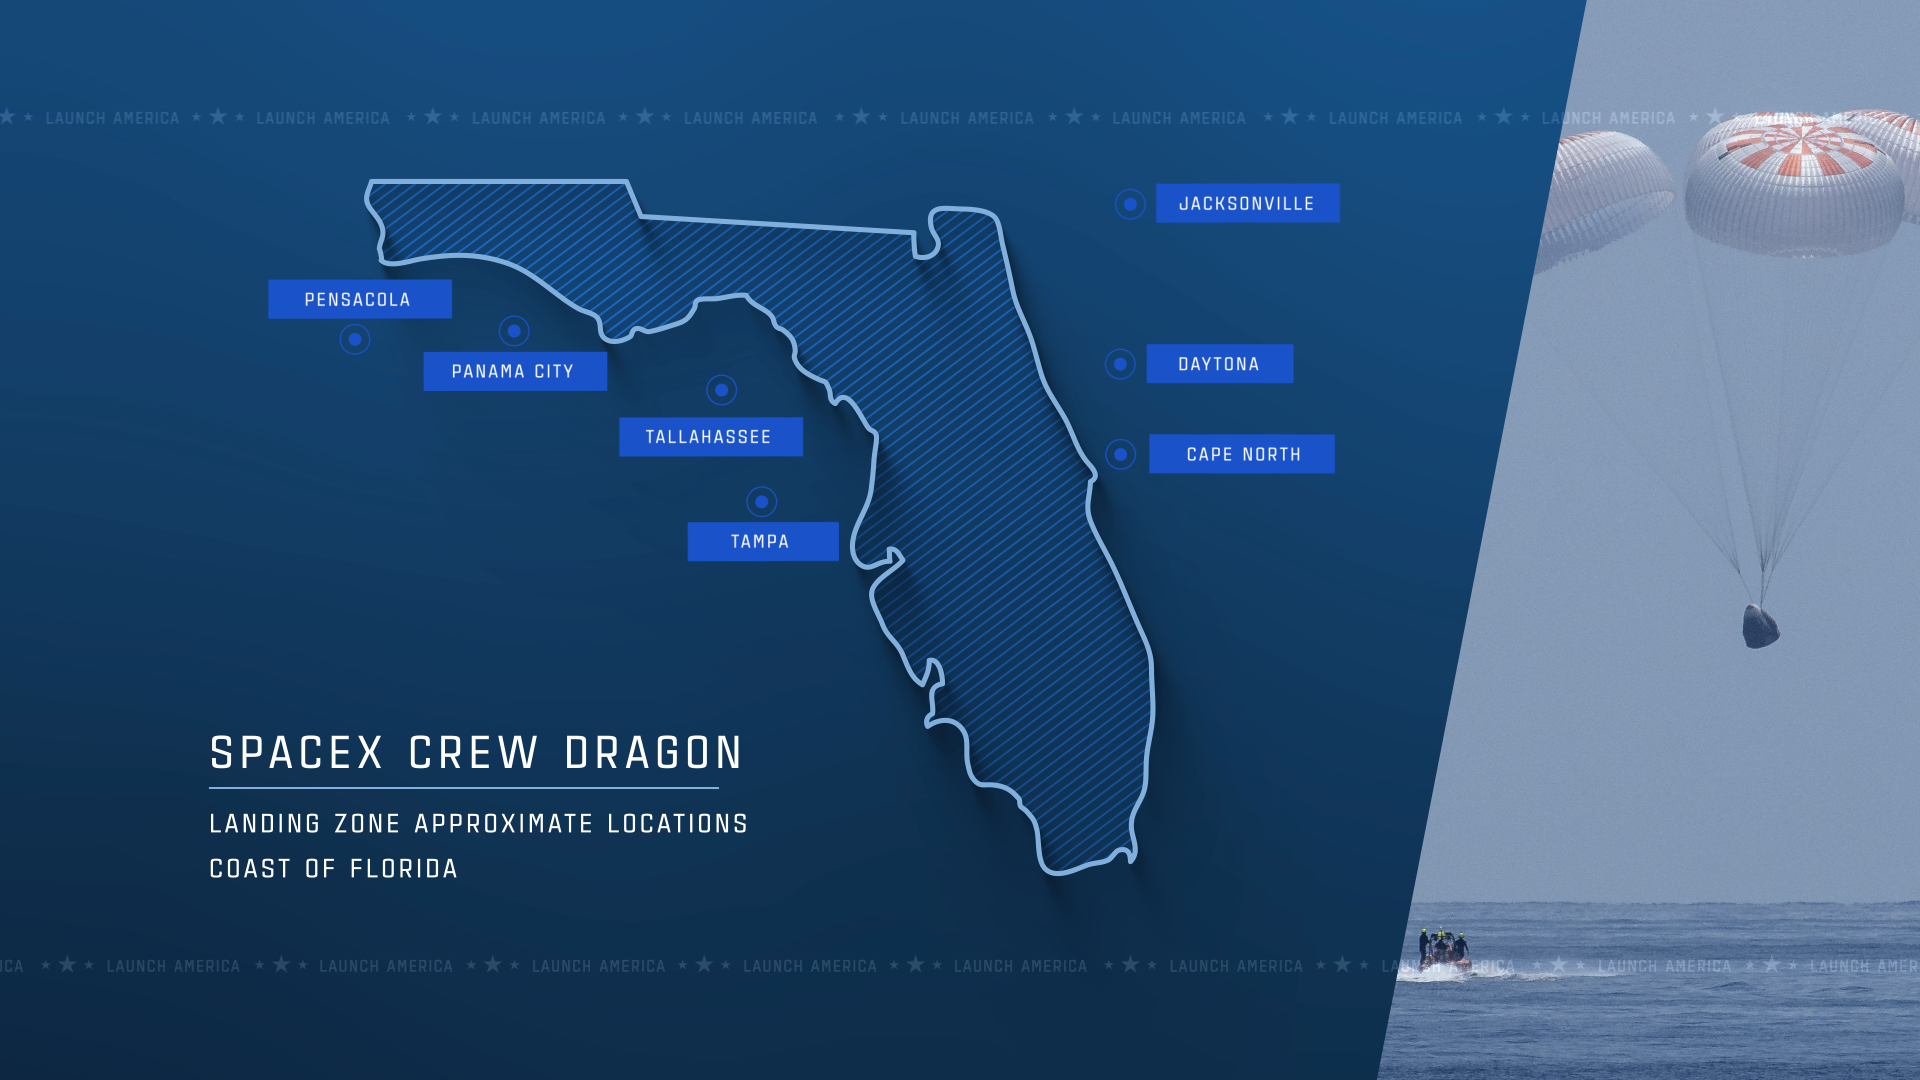 Approximate landing zone locations for the SpaceX Crew Dragon